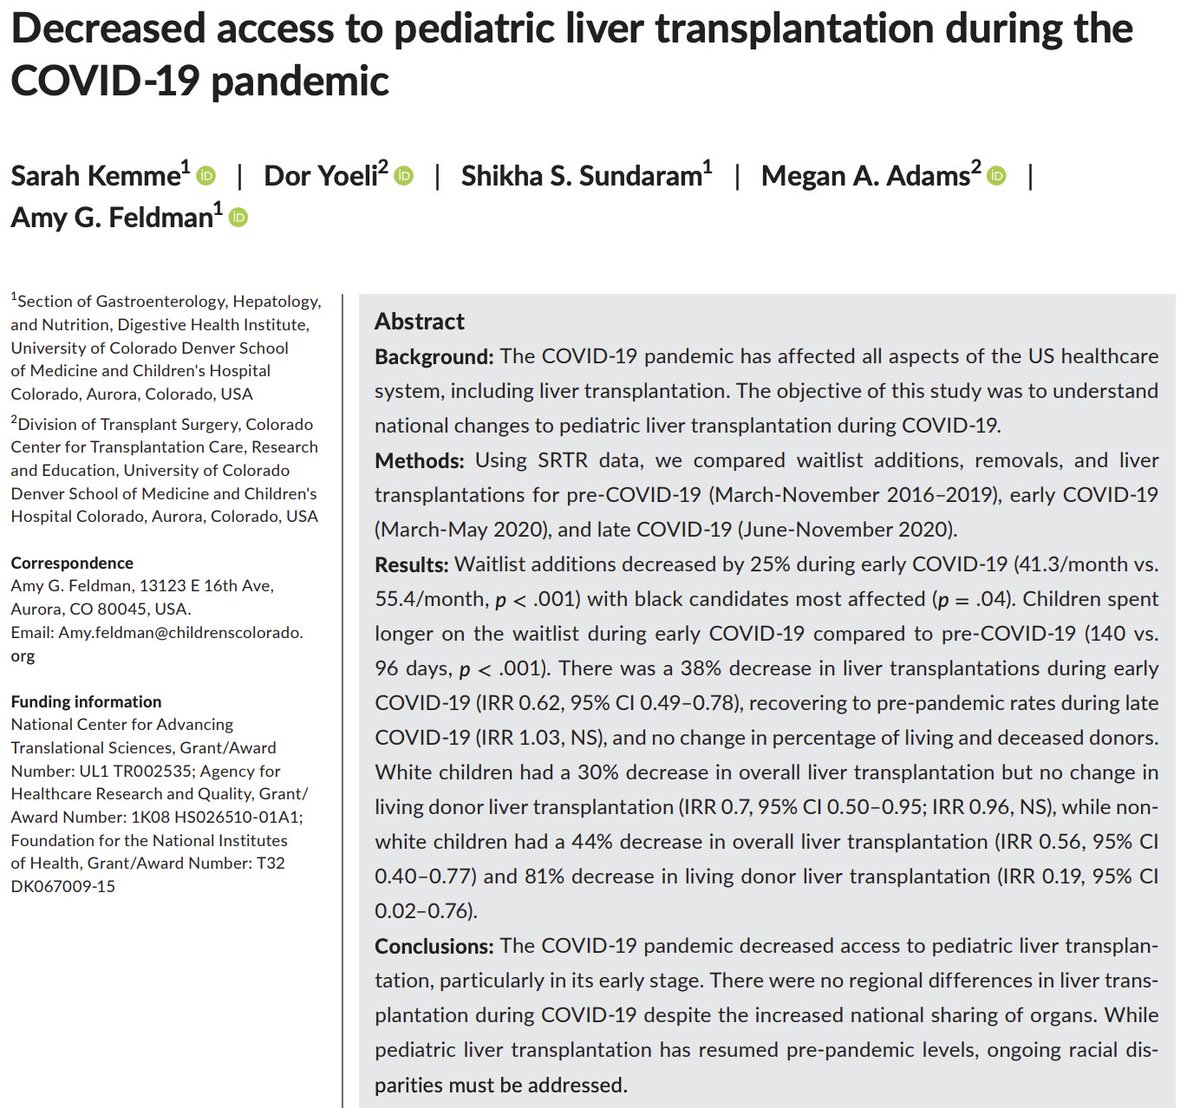 Read on about decreased access to #pediatriclivertransplant during #COVID19 pandemic.
@MeganAdamsMD @dyoel1

onlinelibrary.wiley.com/share/BSGZXSGX…